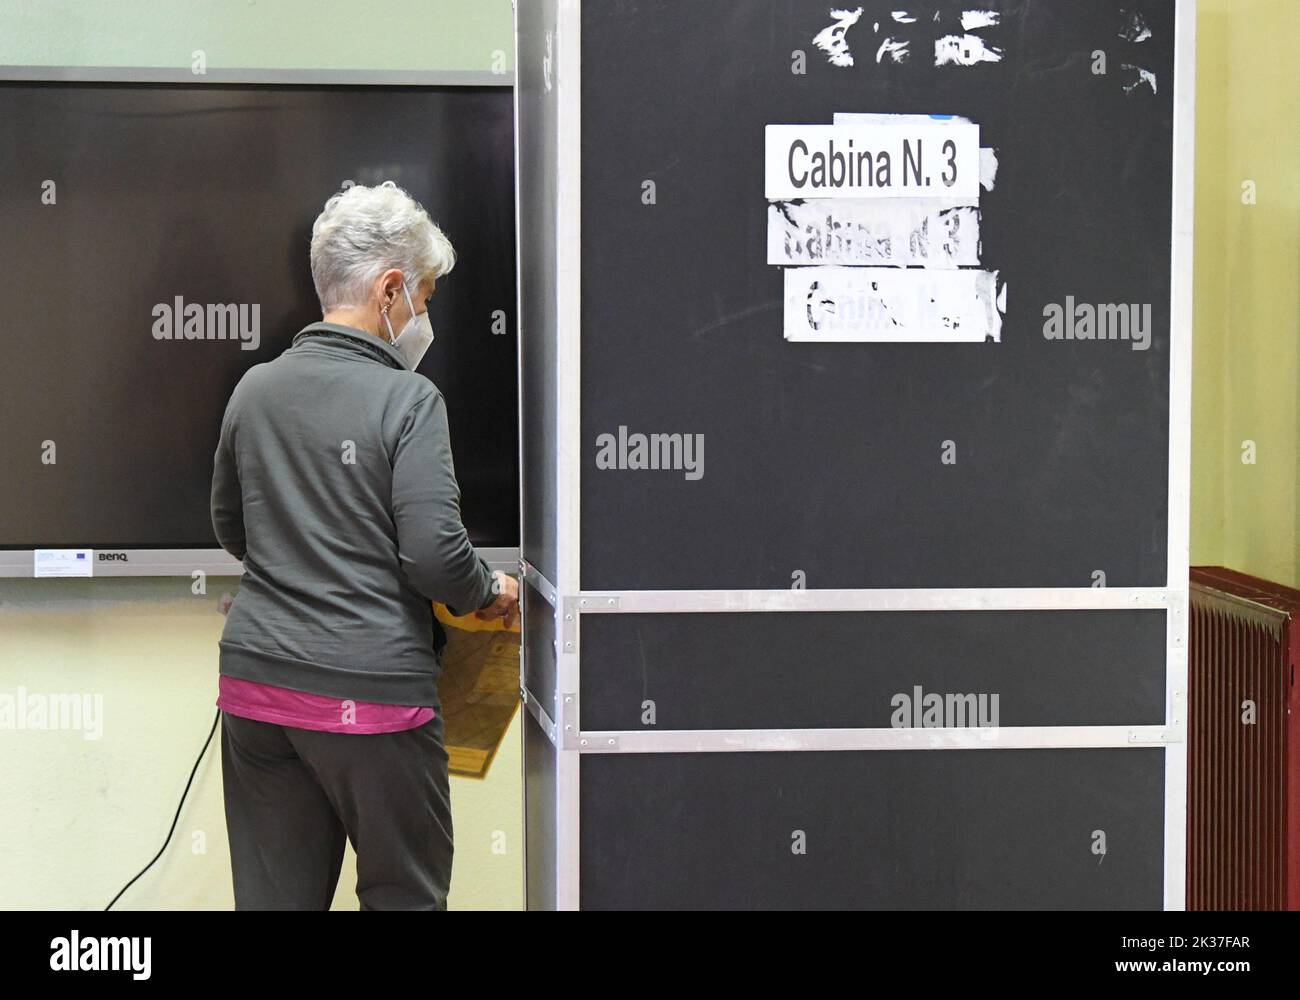 Rome, Italy. 25th Sep, 2022. A citizen prepares to cast the ballot at a polling station in Rome, Italy, Sept. 25, 2022. Polls opened to renew the parliament in Italy early on Sunday, in a snap election seen as crucial for the country. Credit: Jin Mamengni/Xinhua/Alamy Live News Stock Photo